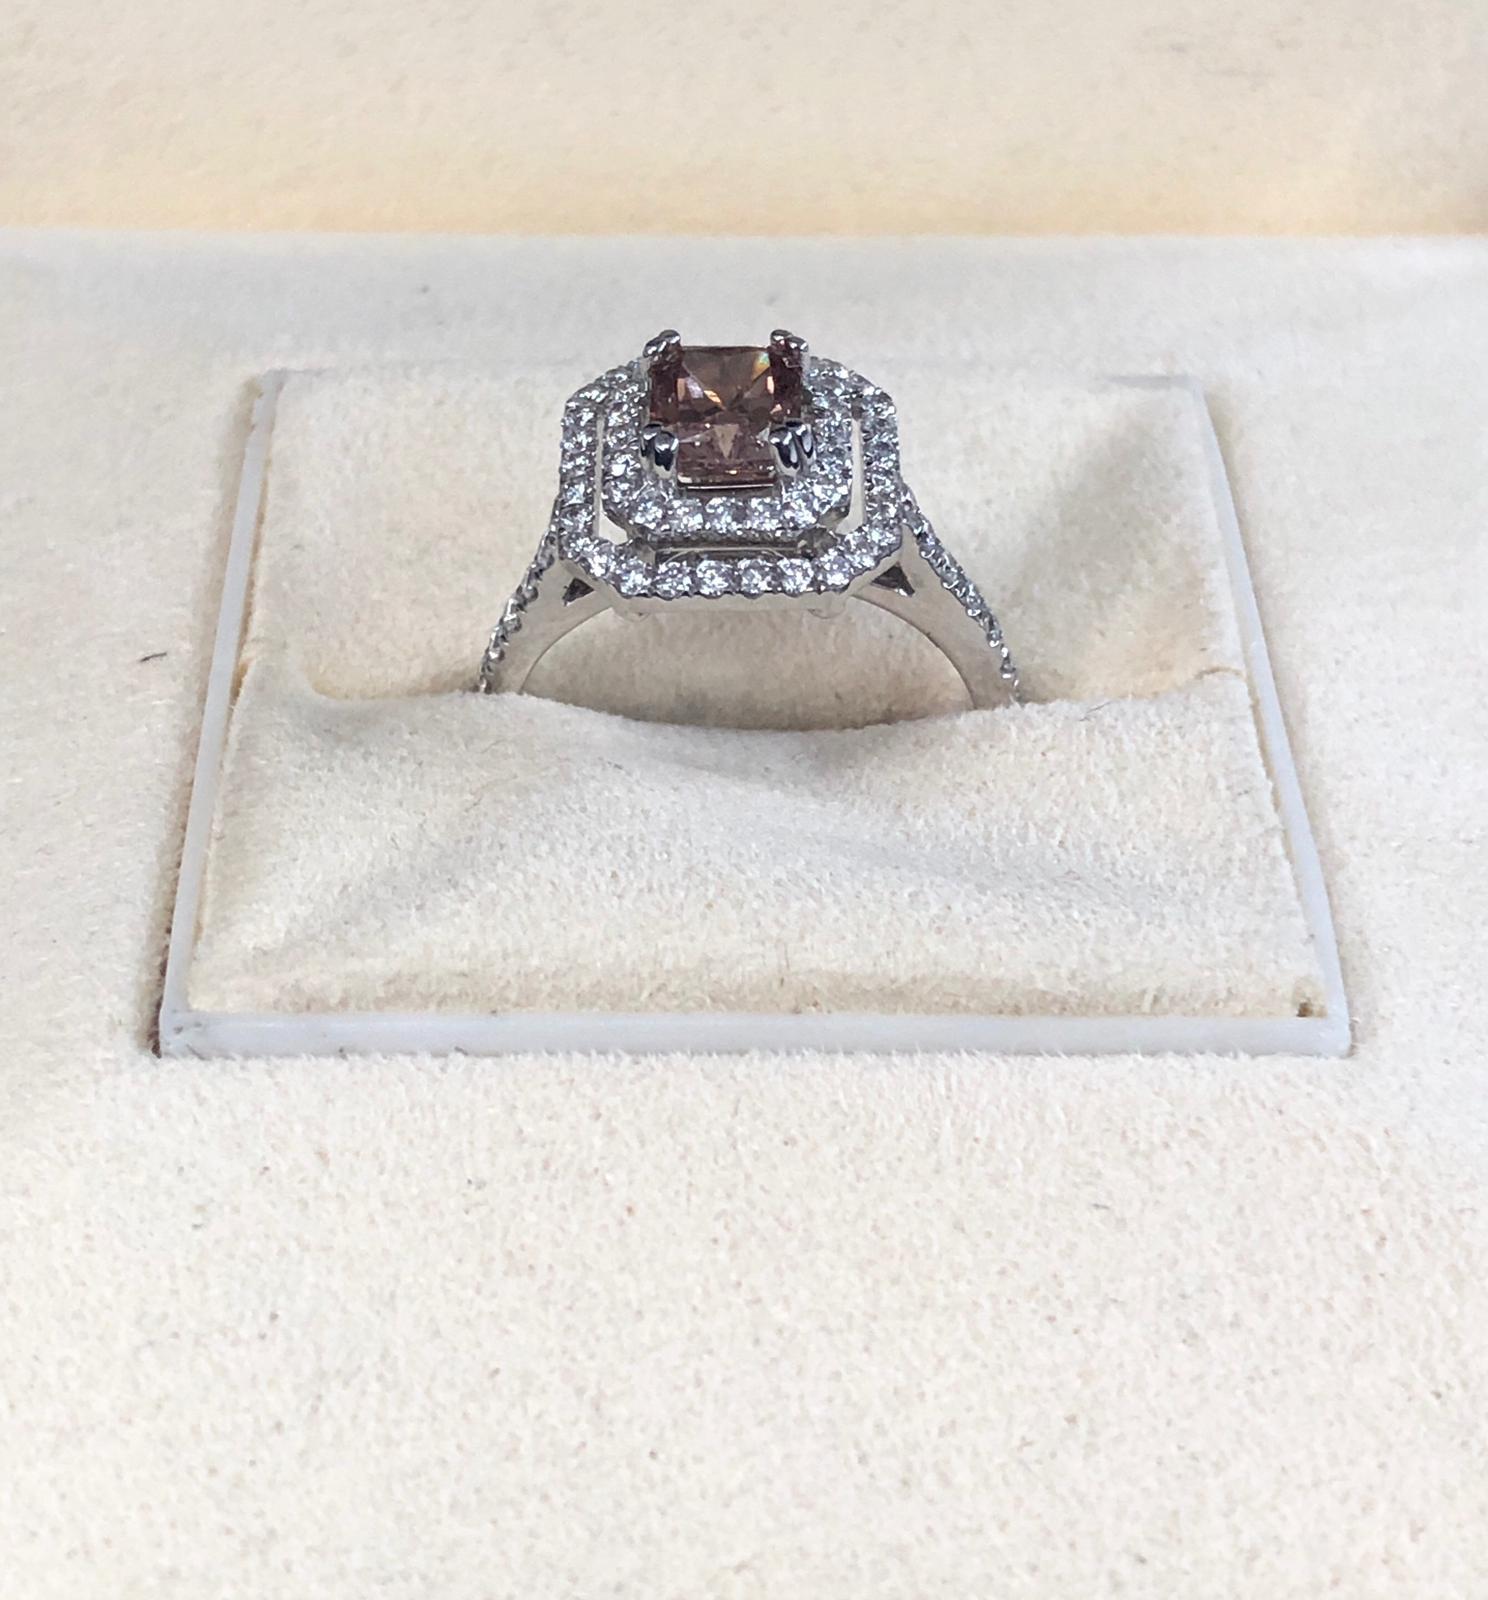 This is a Natural Fancy Pink-Brown Radiant cut diamond weighing 1.12 carats by GIA. surrounded by paved white diamonds in the double halo setting. Its transparency and luster are excellent. set on 18K white gold, this pear ring is the ultimate gift